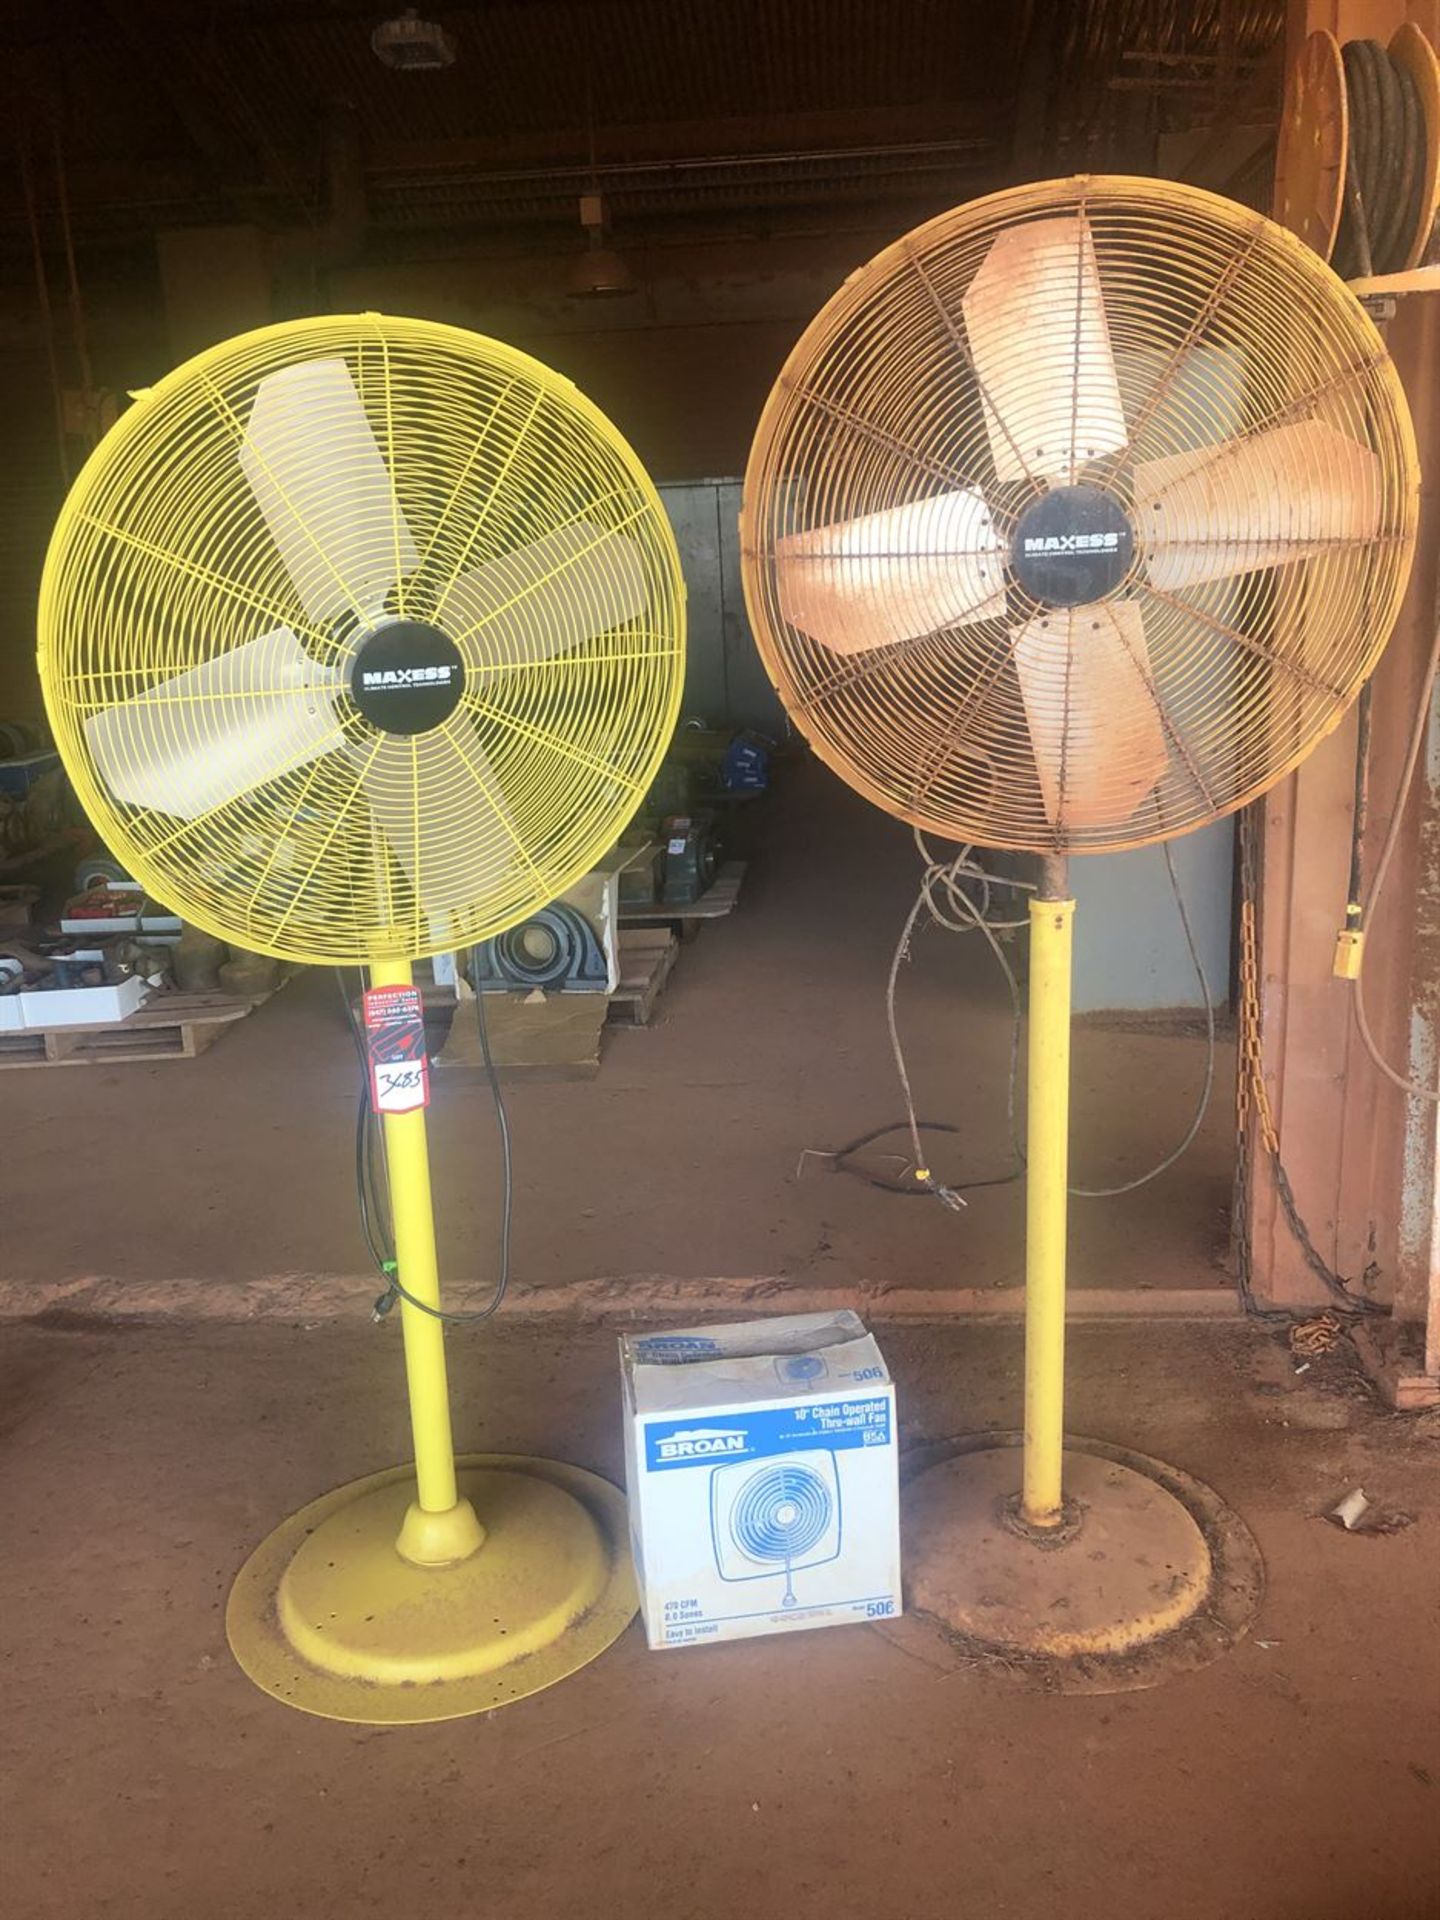 Lot Comprising of (2) MAXIS Pedestal Shop Fans, and (1) BROAN Thru-Wall Fan (Location: Bearing